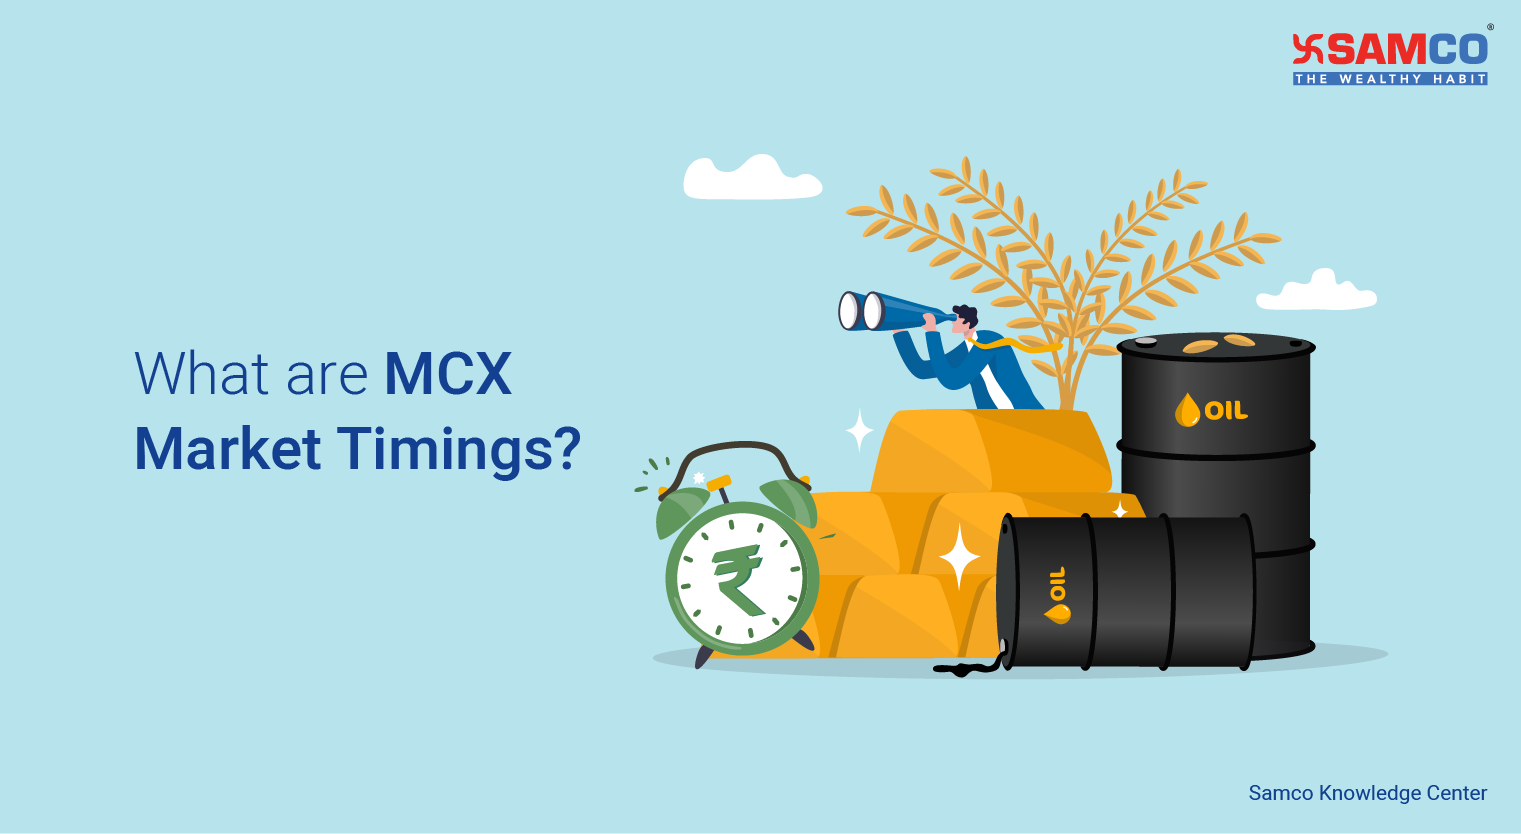 What are MCX Market Timings